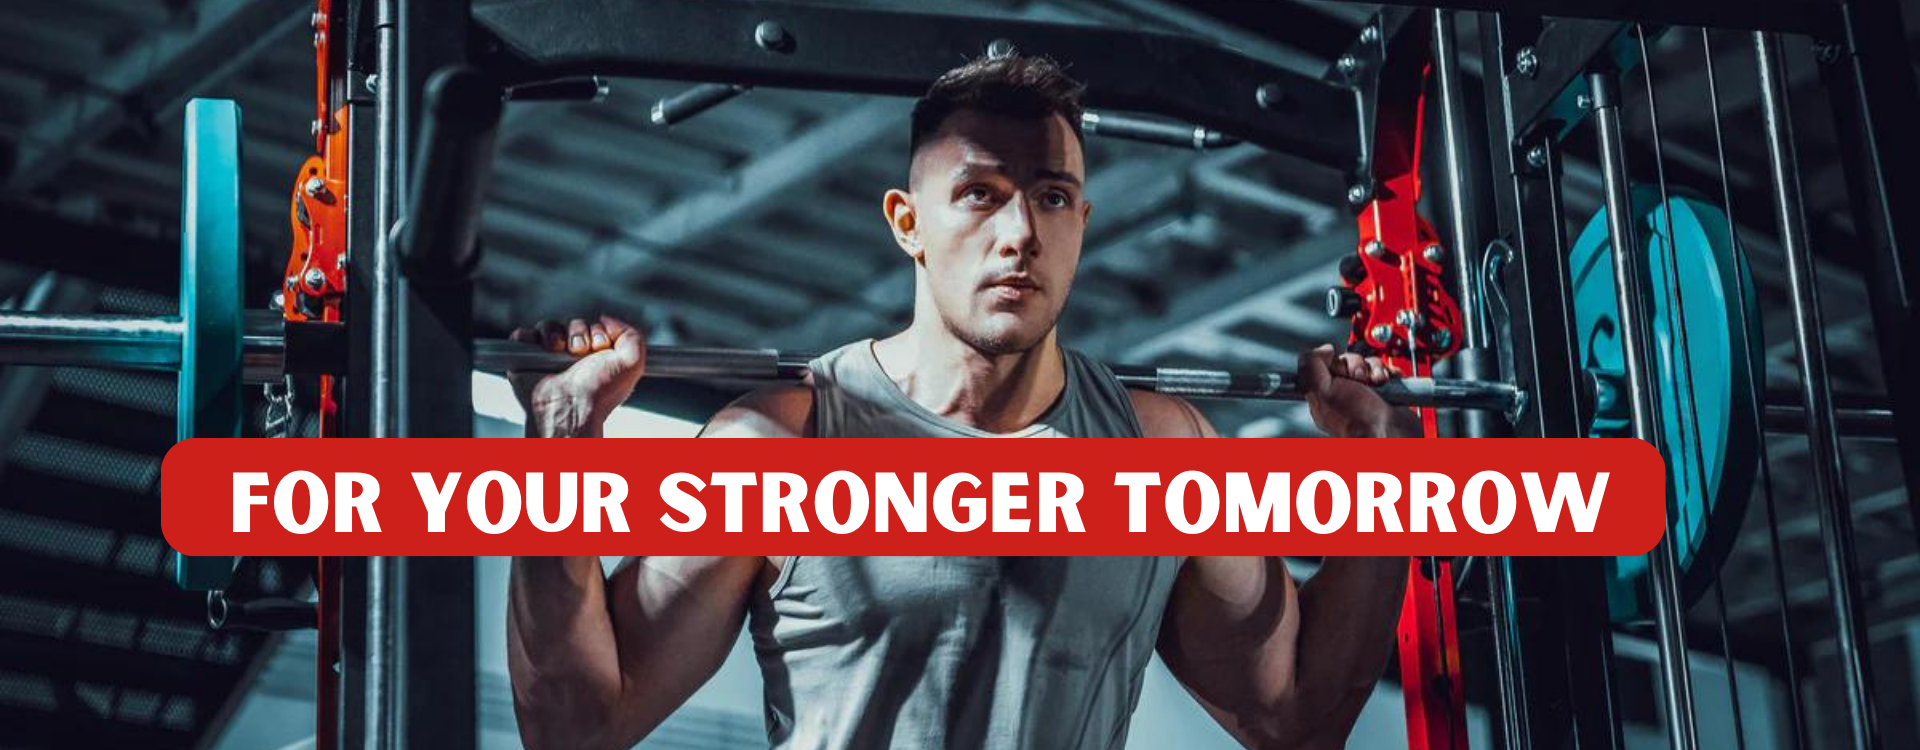 For-Your-Stronger-Tomorrow-mighty-muscle-image